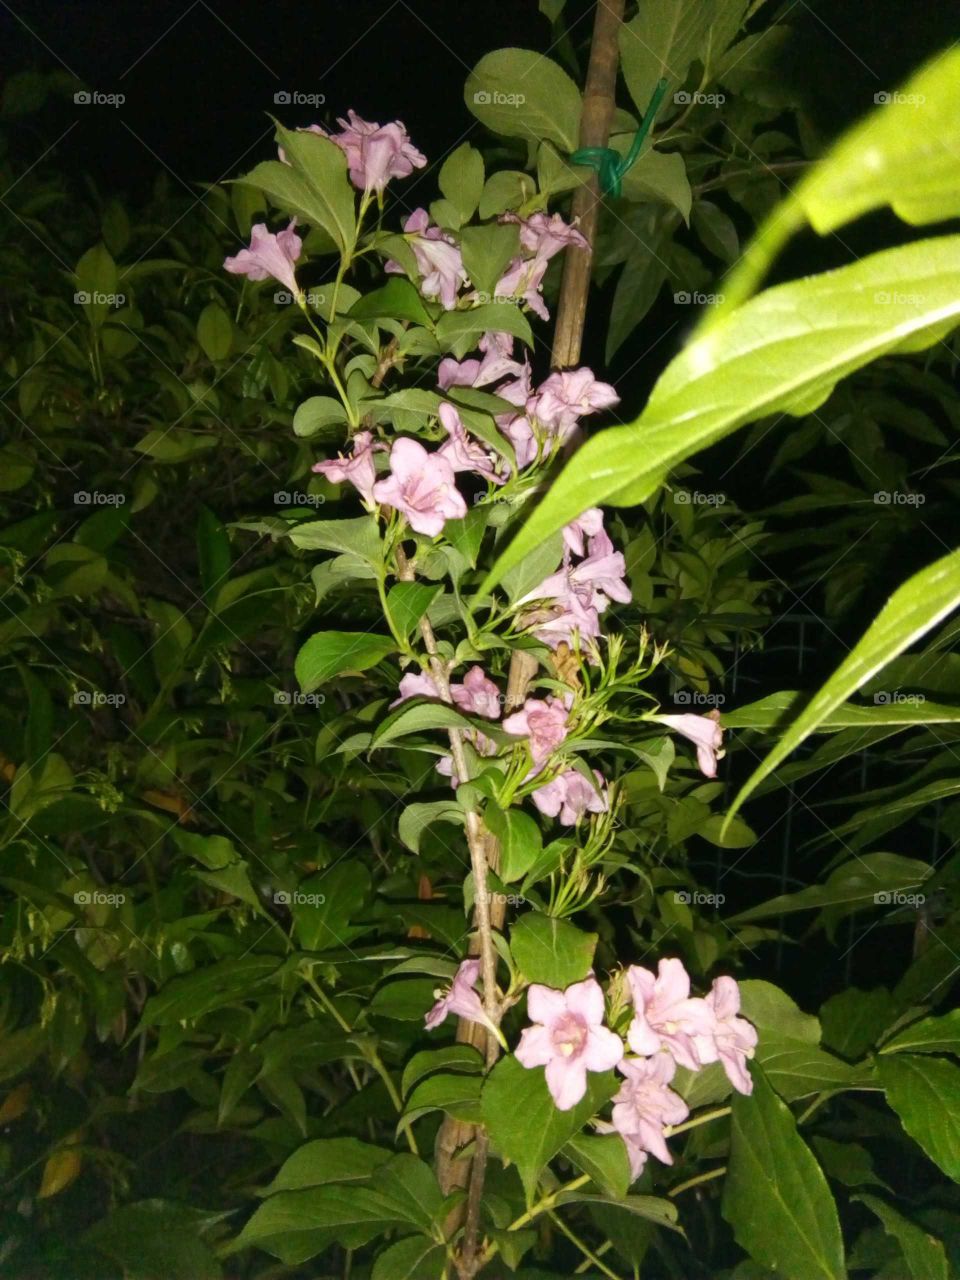 Flowers by night